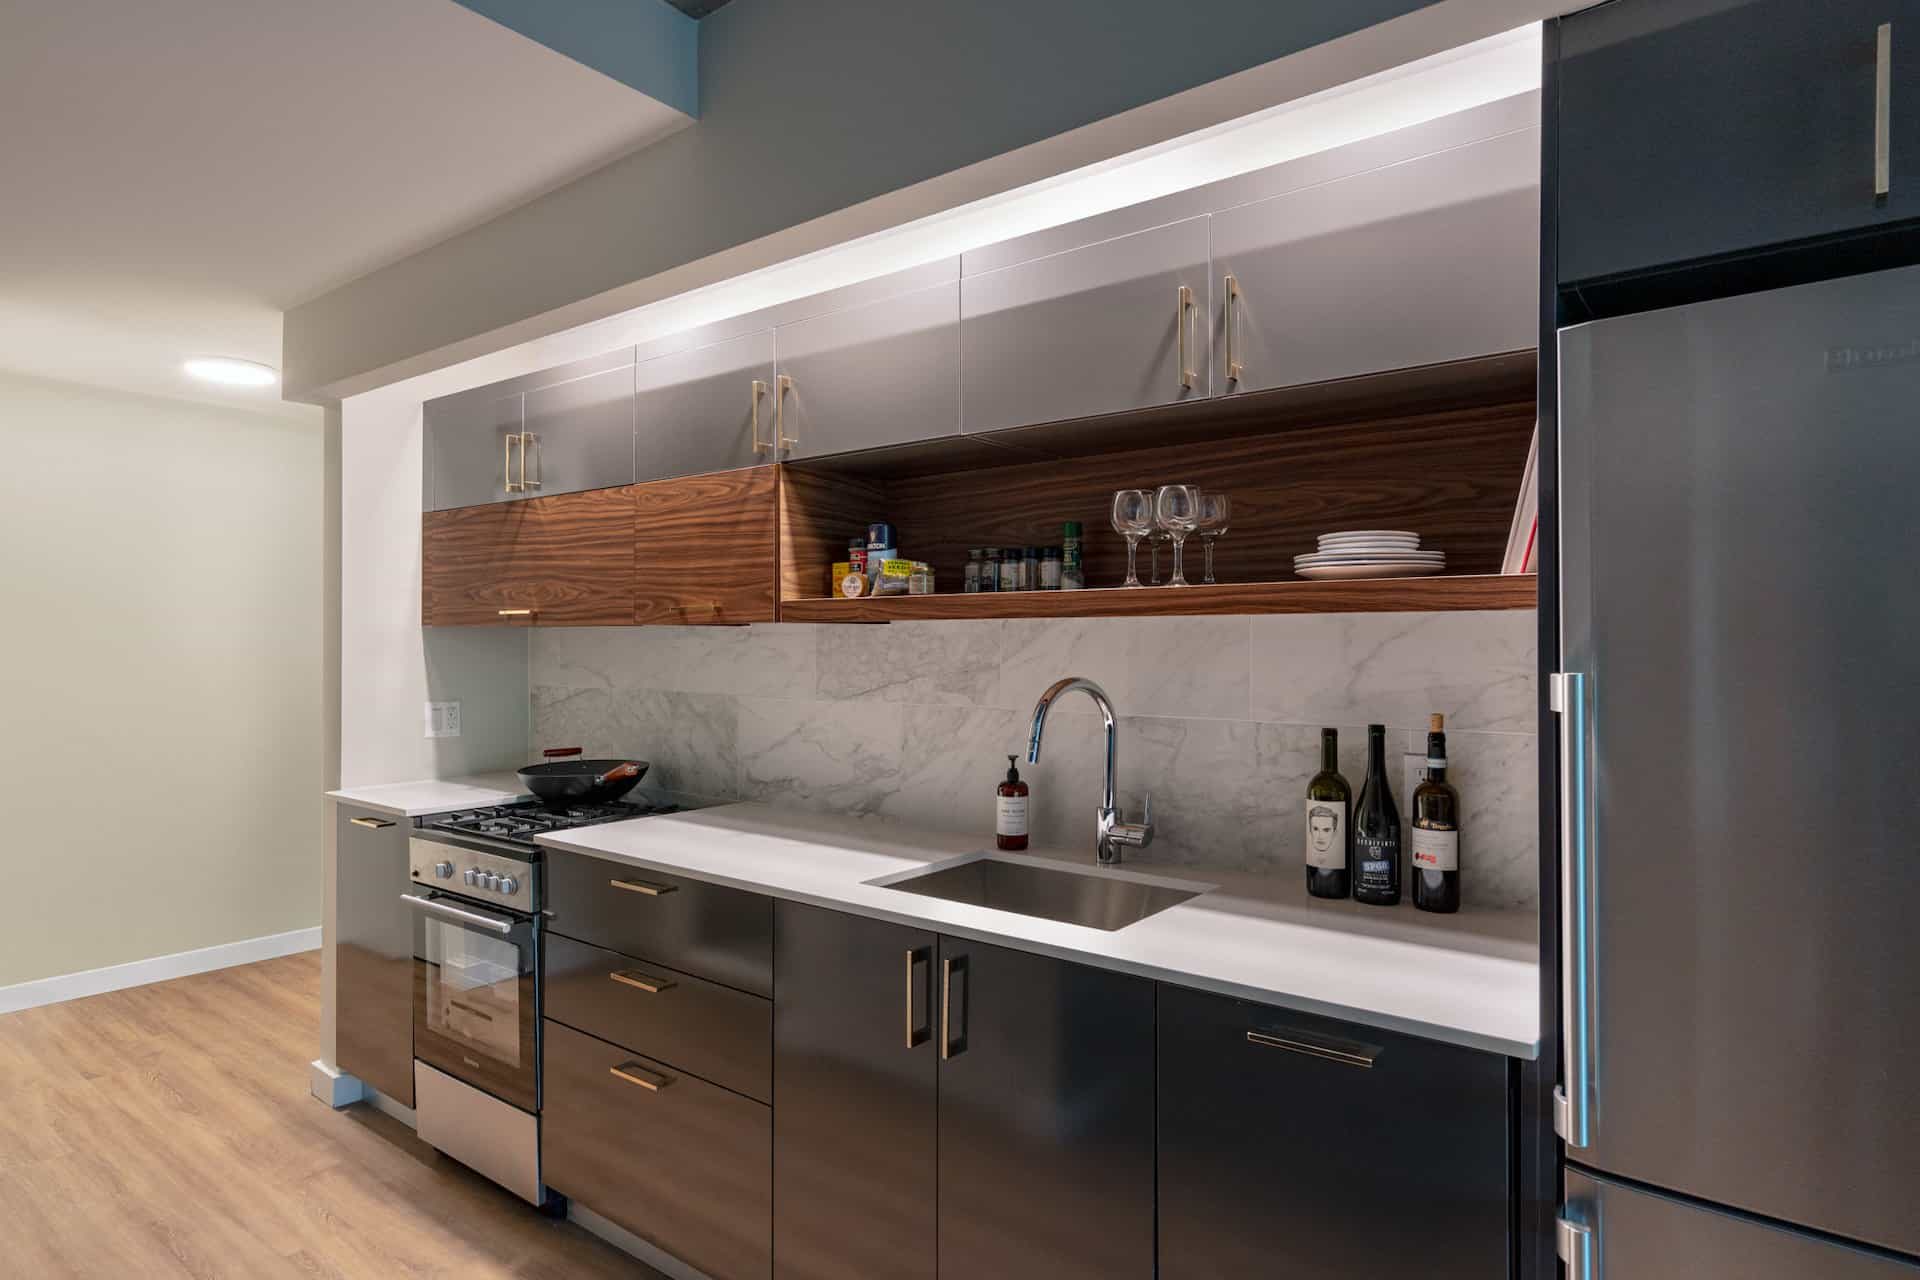 Kitchen at 222 Johnson Avenue apartments in Brooklyn with stone countertops, stainless steel appliances and hardwood floors.